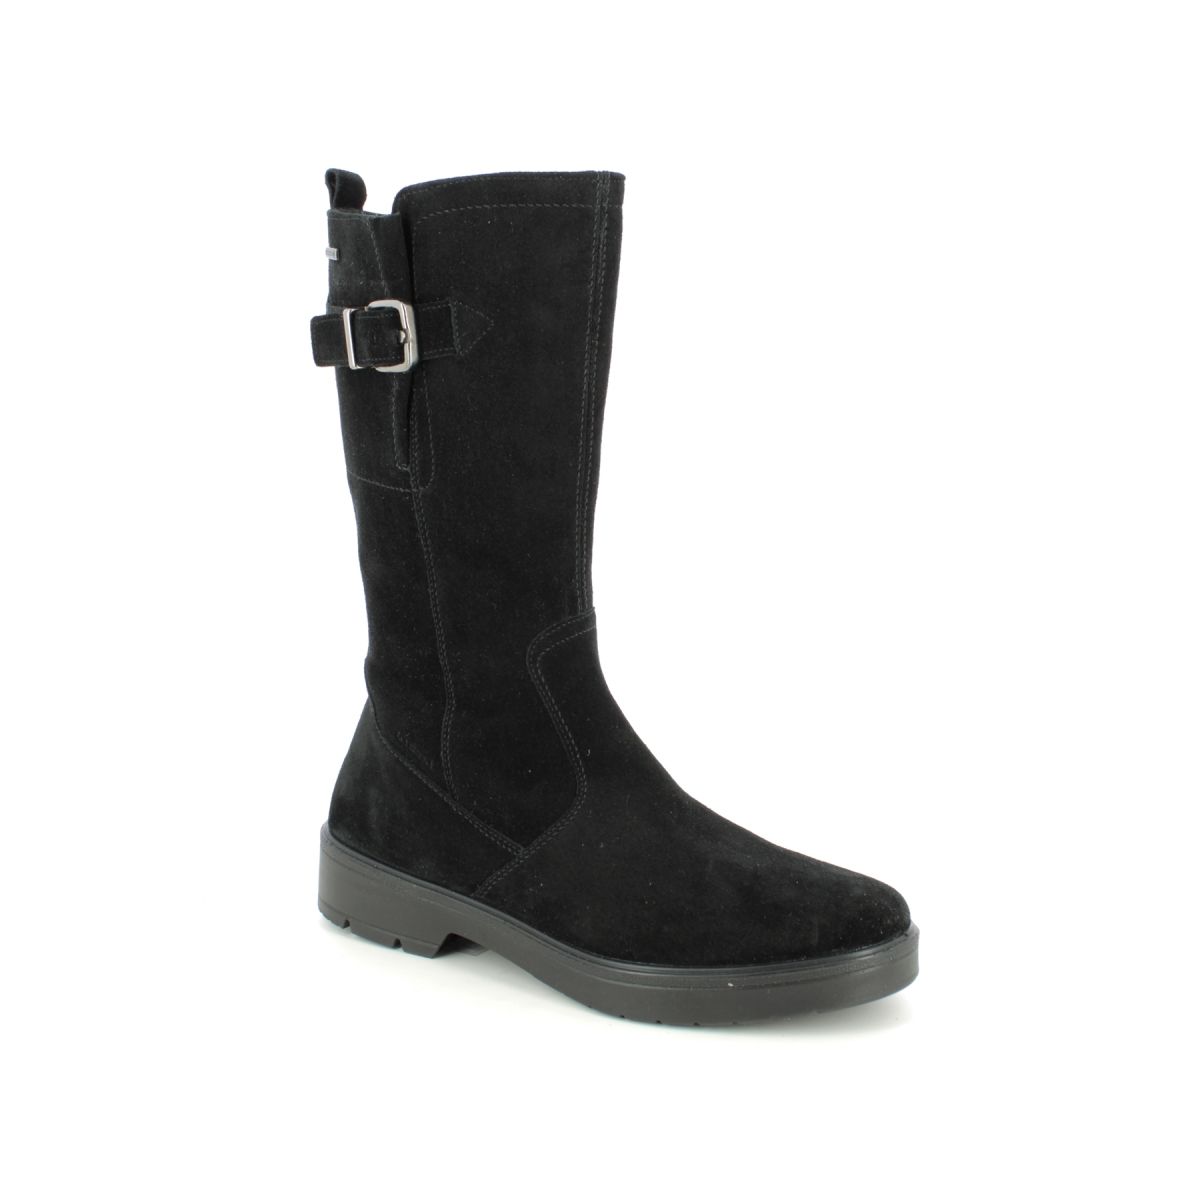 Legero Mystic Mid Gtx Black Suede Womens Mid Calf Boots 2000196-0000 In Size 7.5 In Plain Black Suede